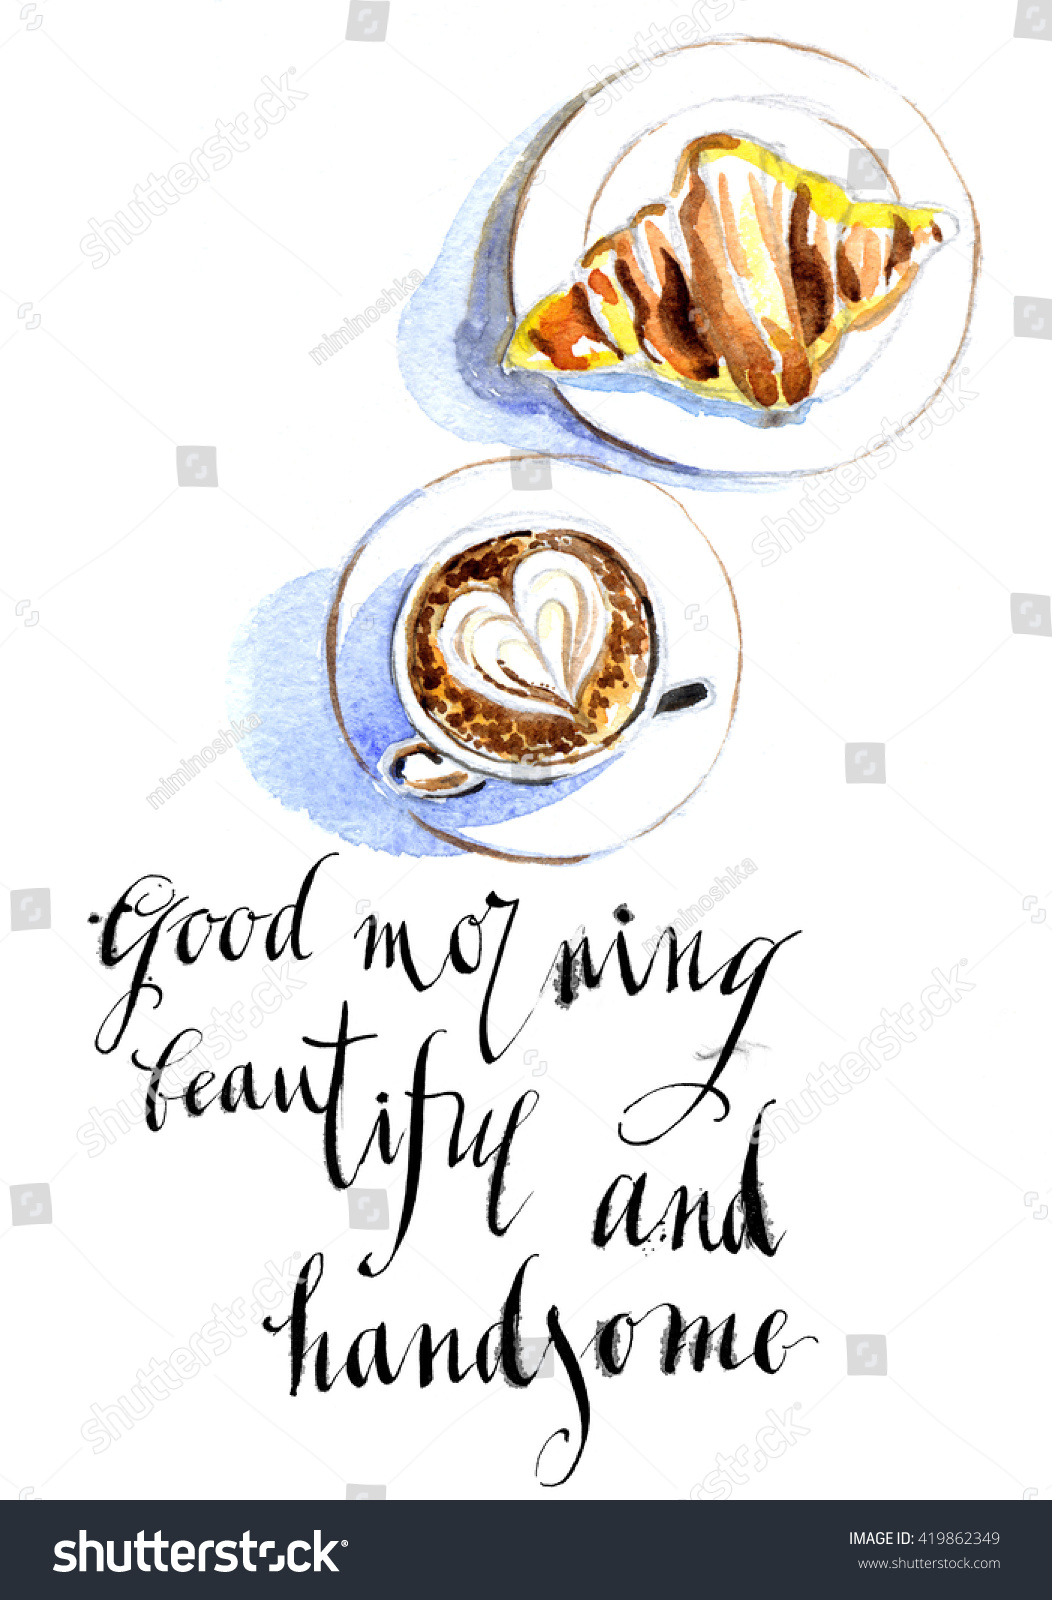 French breakfast of coffee and croissant, latte art #419862349